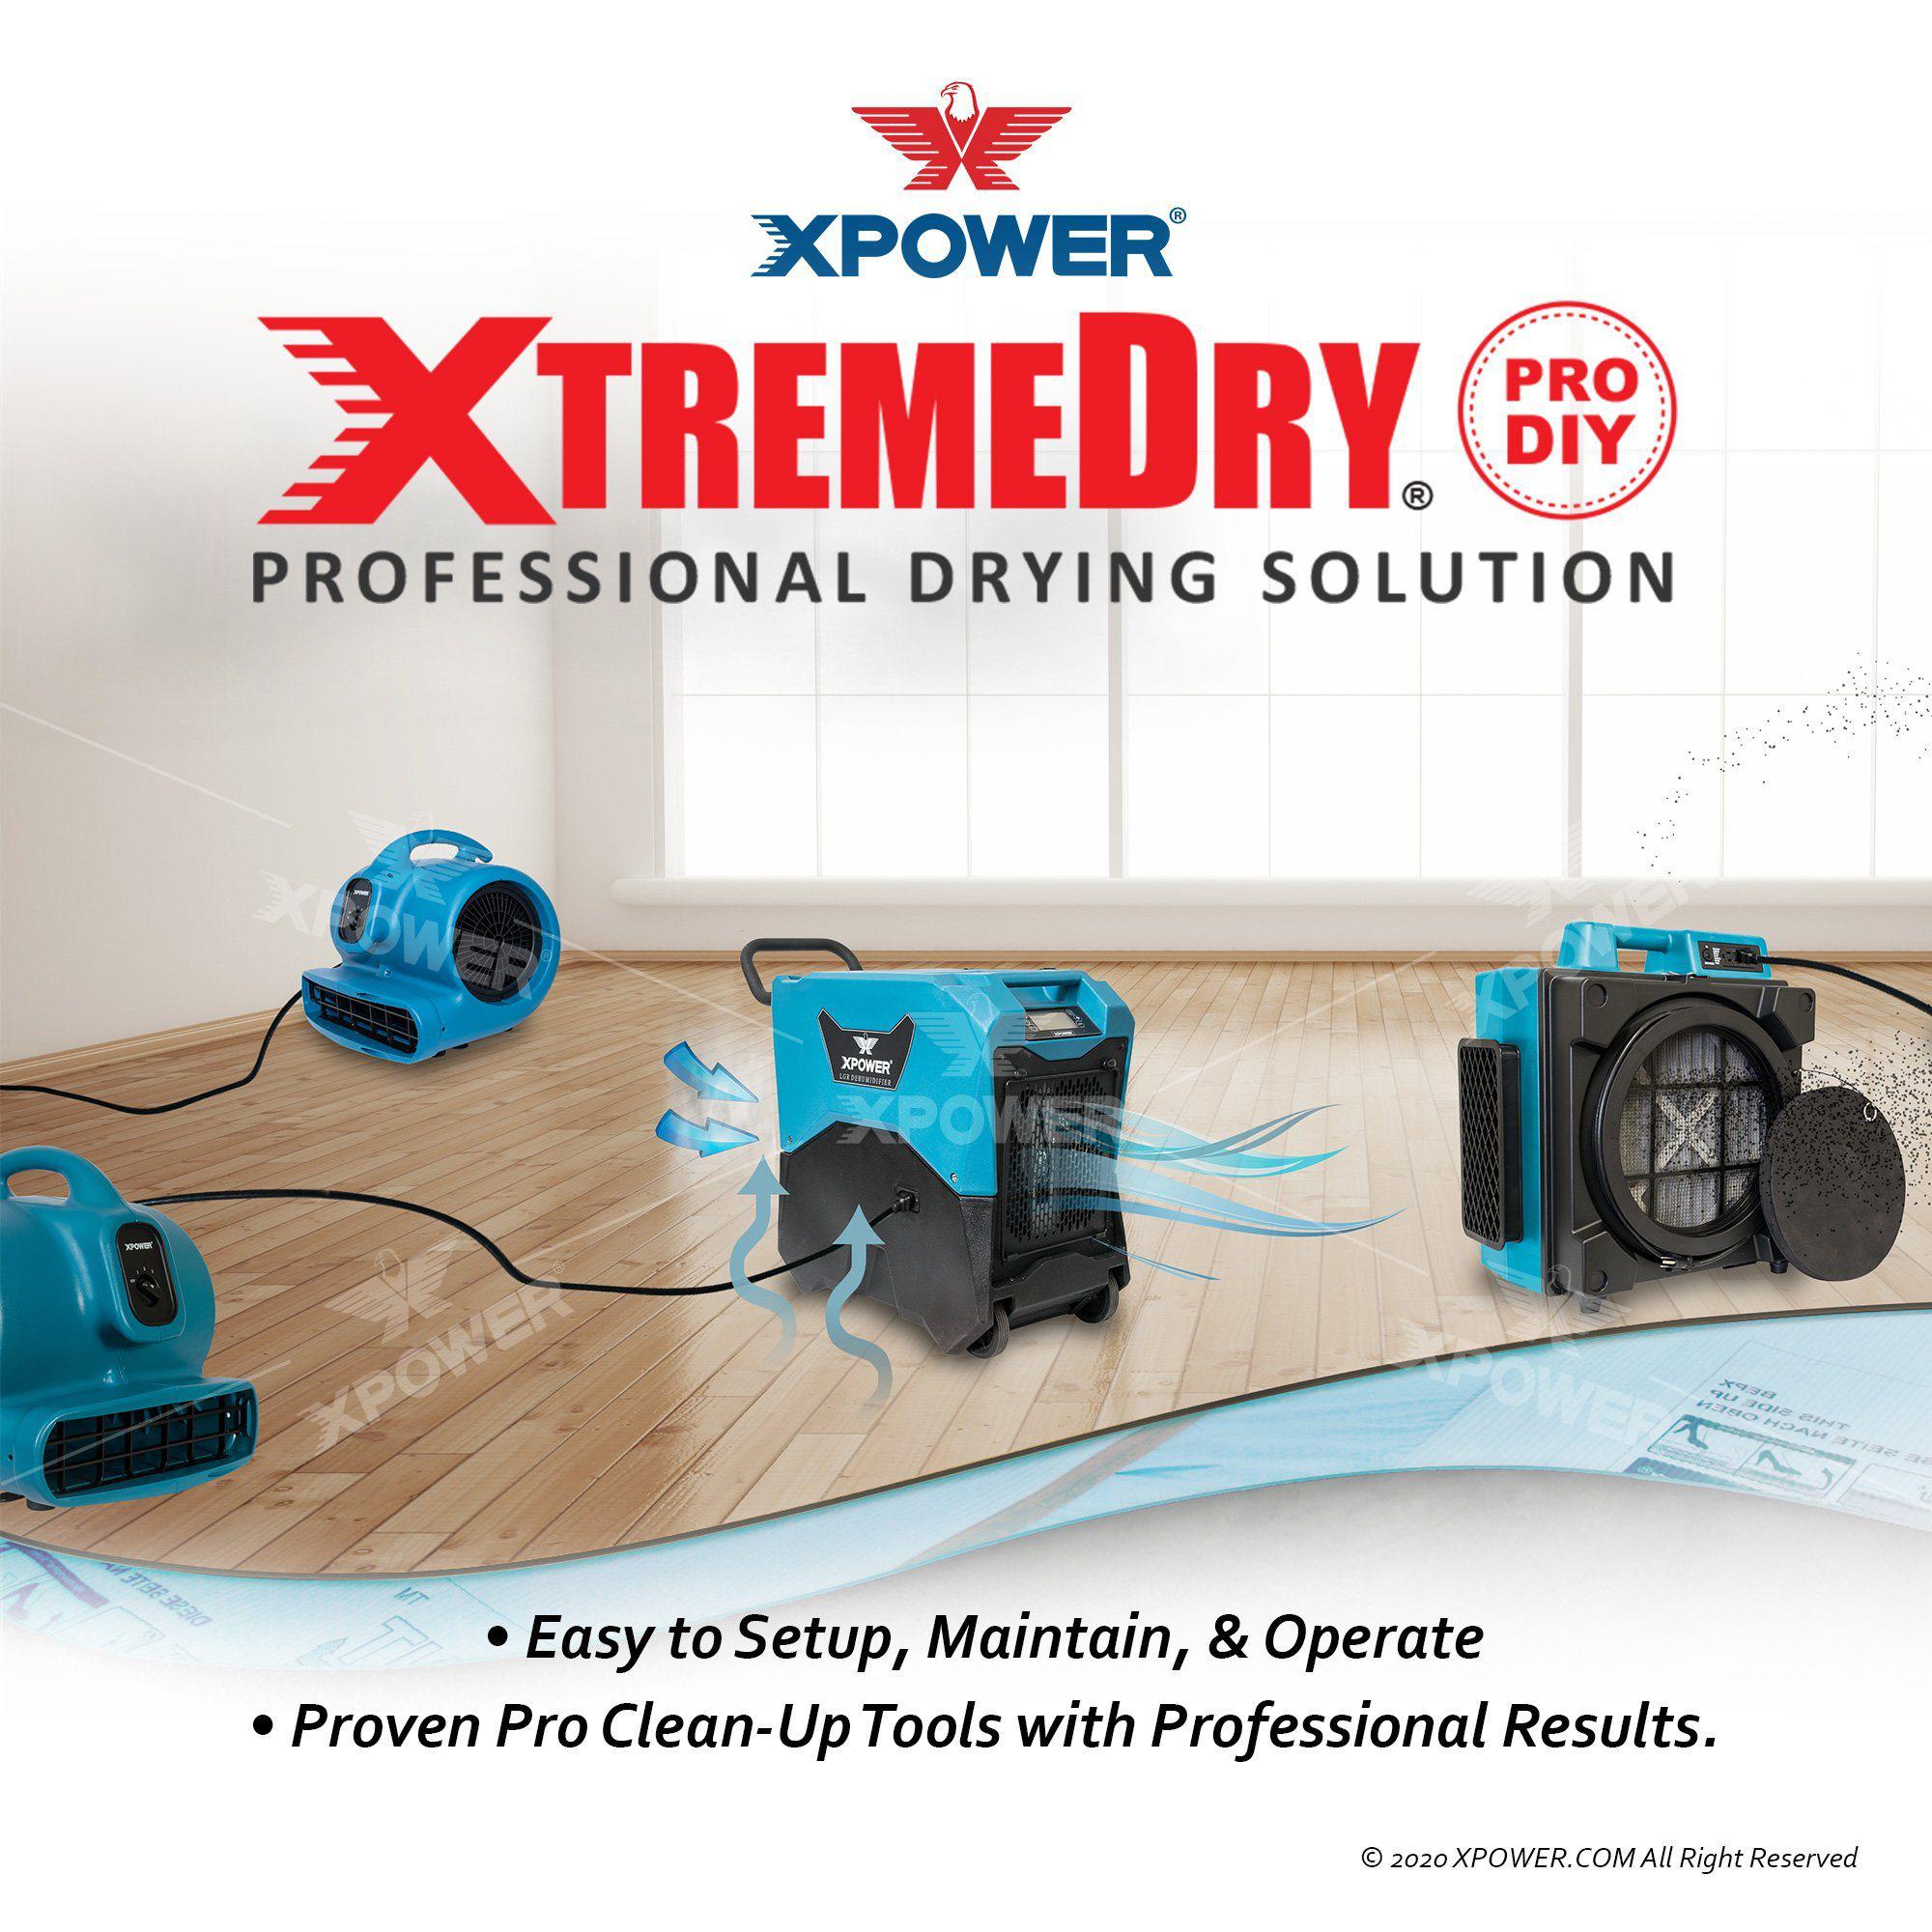 XPOWER XtremeDry® Pro-DIY Restoration TOTAL Clean-Up Tool Kit